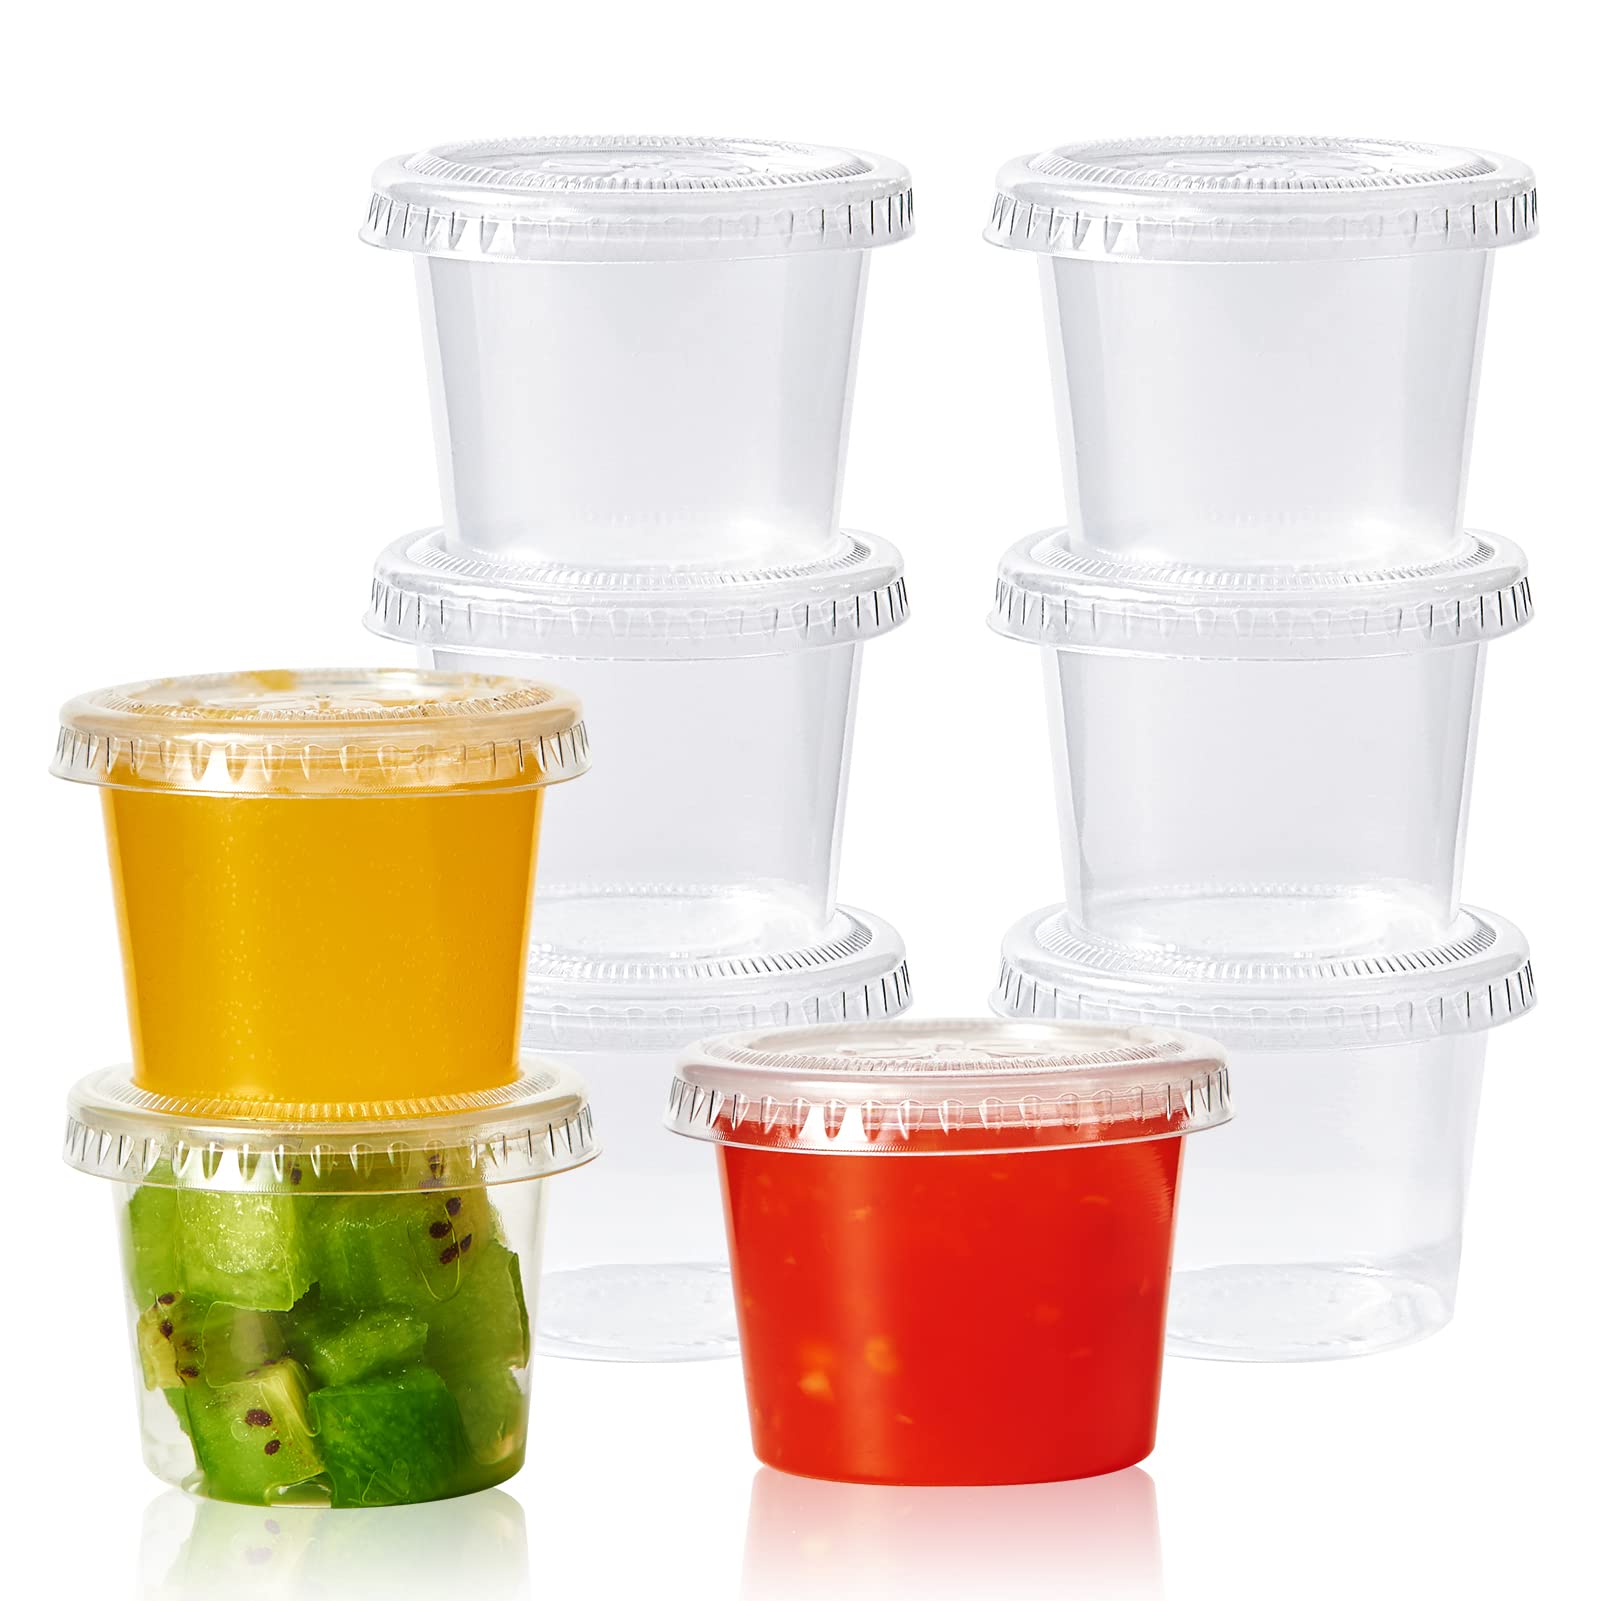 Disposable 1oz Jello Shot Plastic Portion Cups with Lids, Clear Condiment  Cups, Sampling Cup Pack of 50 